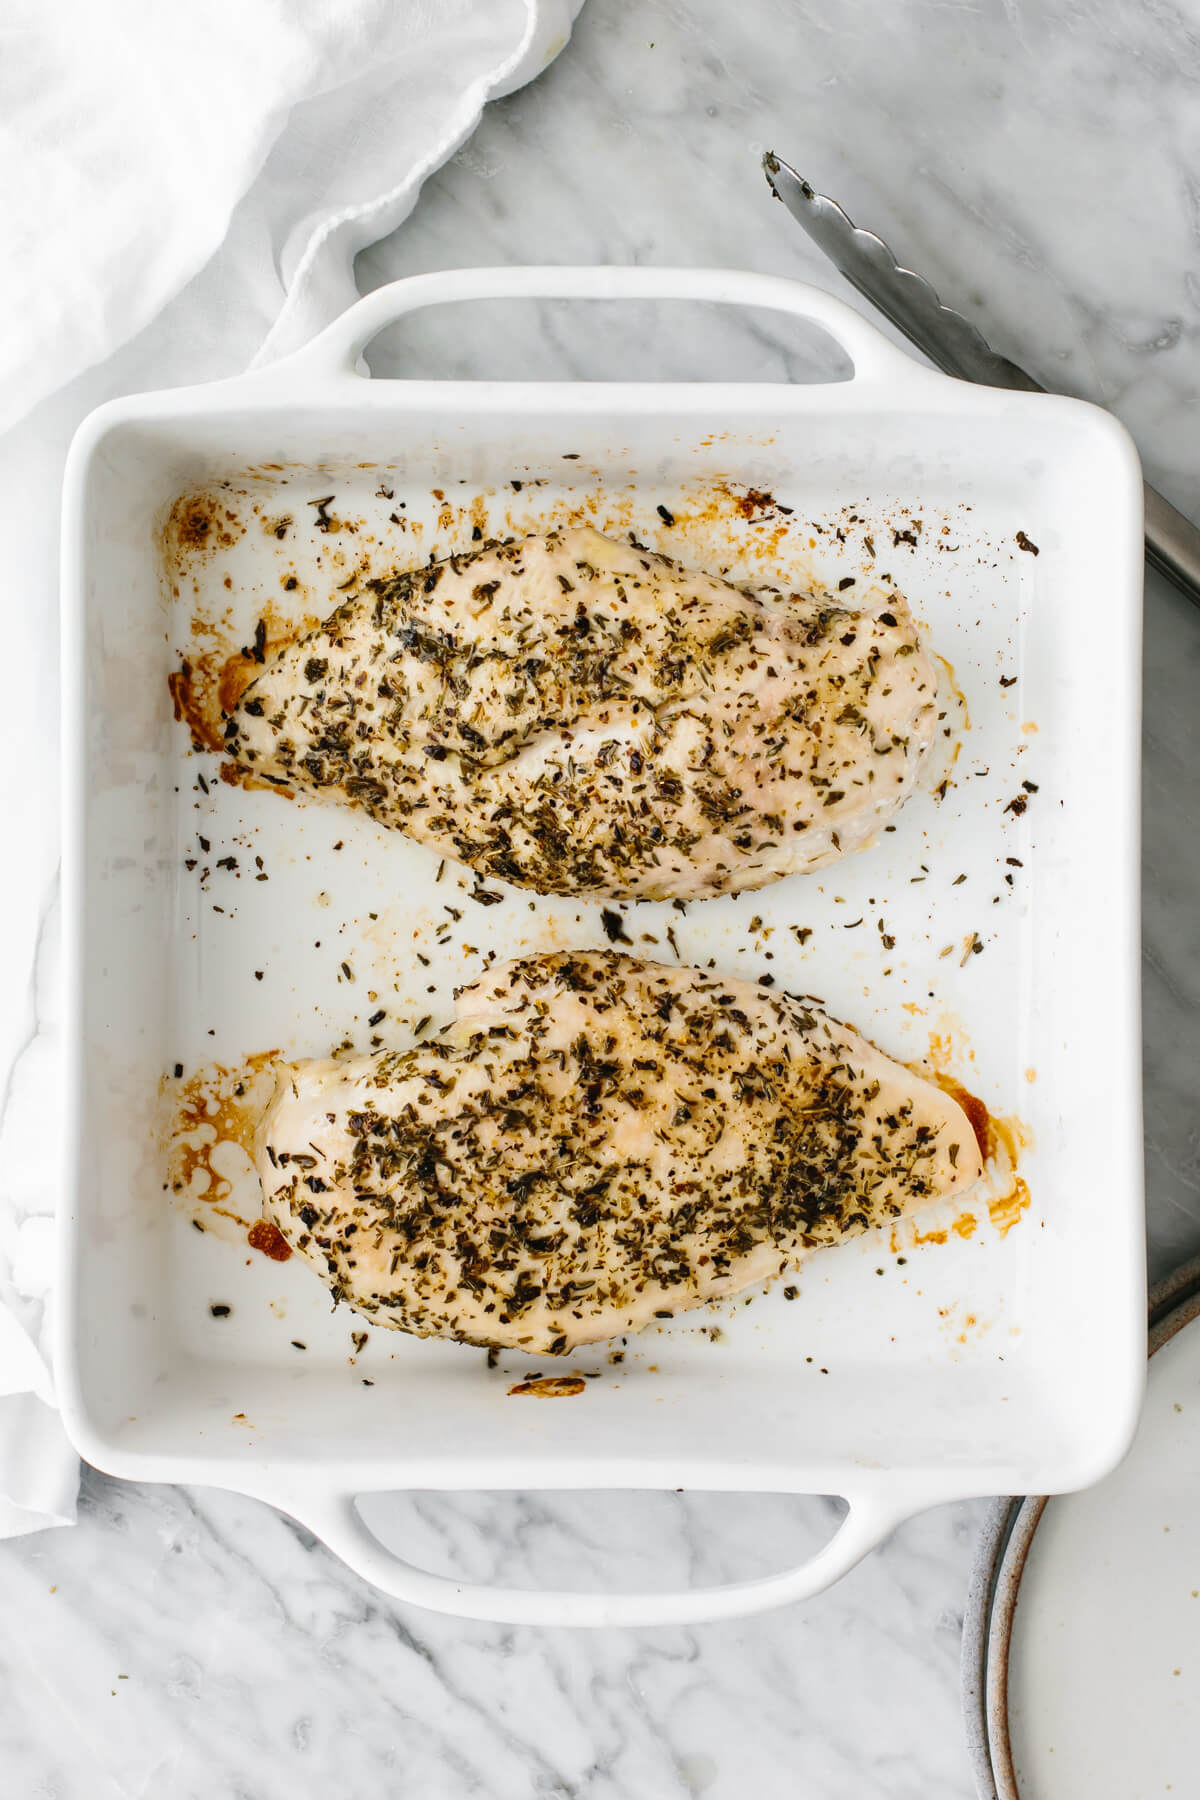 Herb baked chicken breasts in a baking dish.